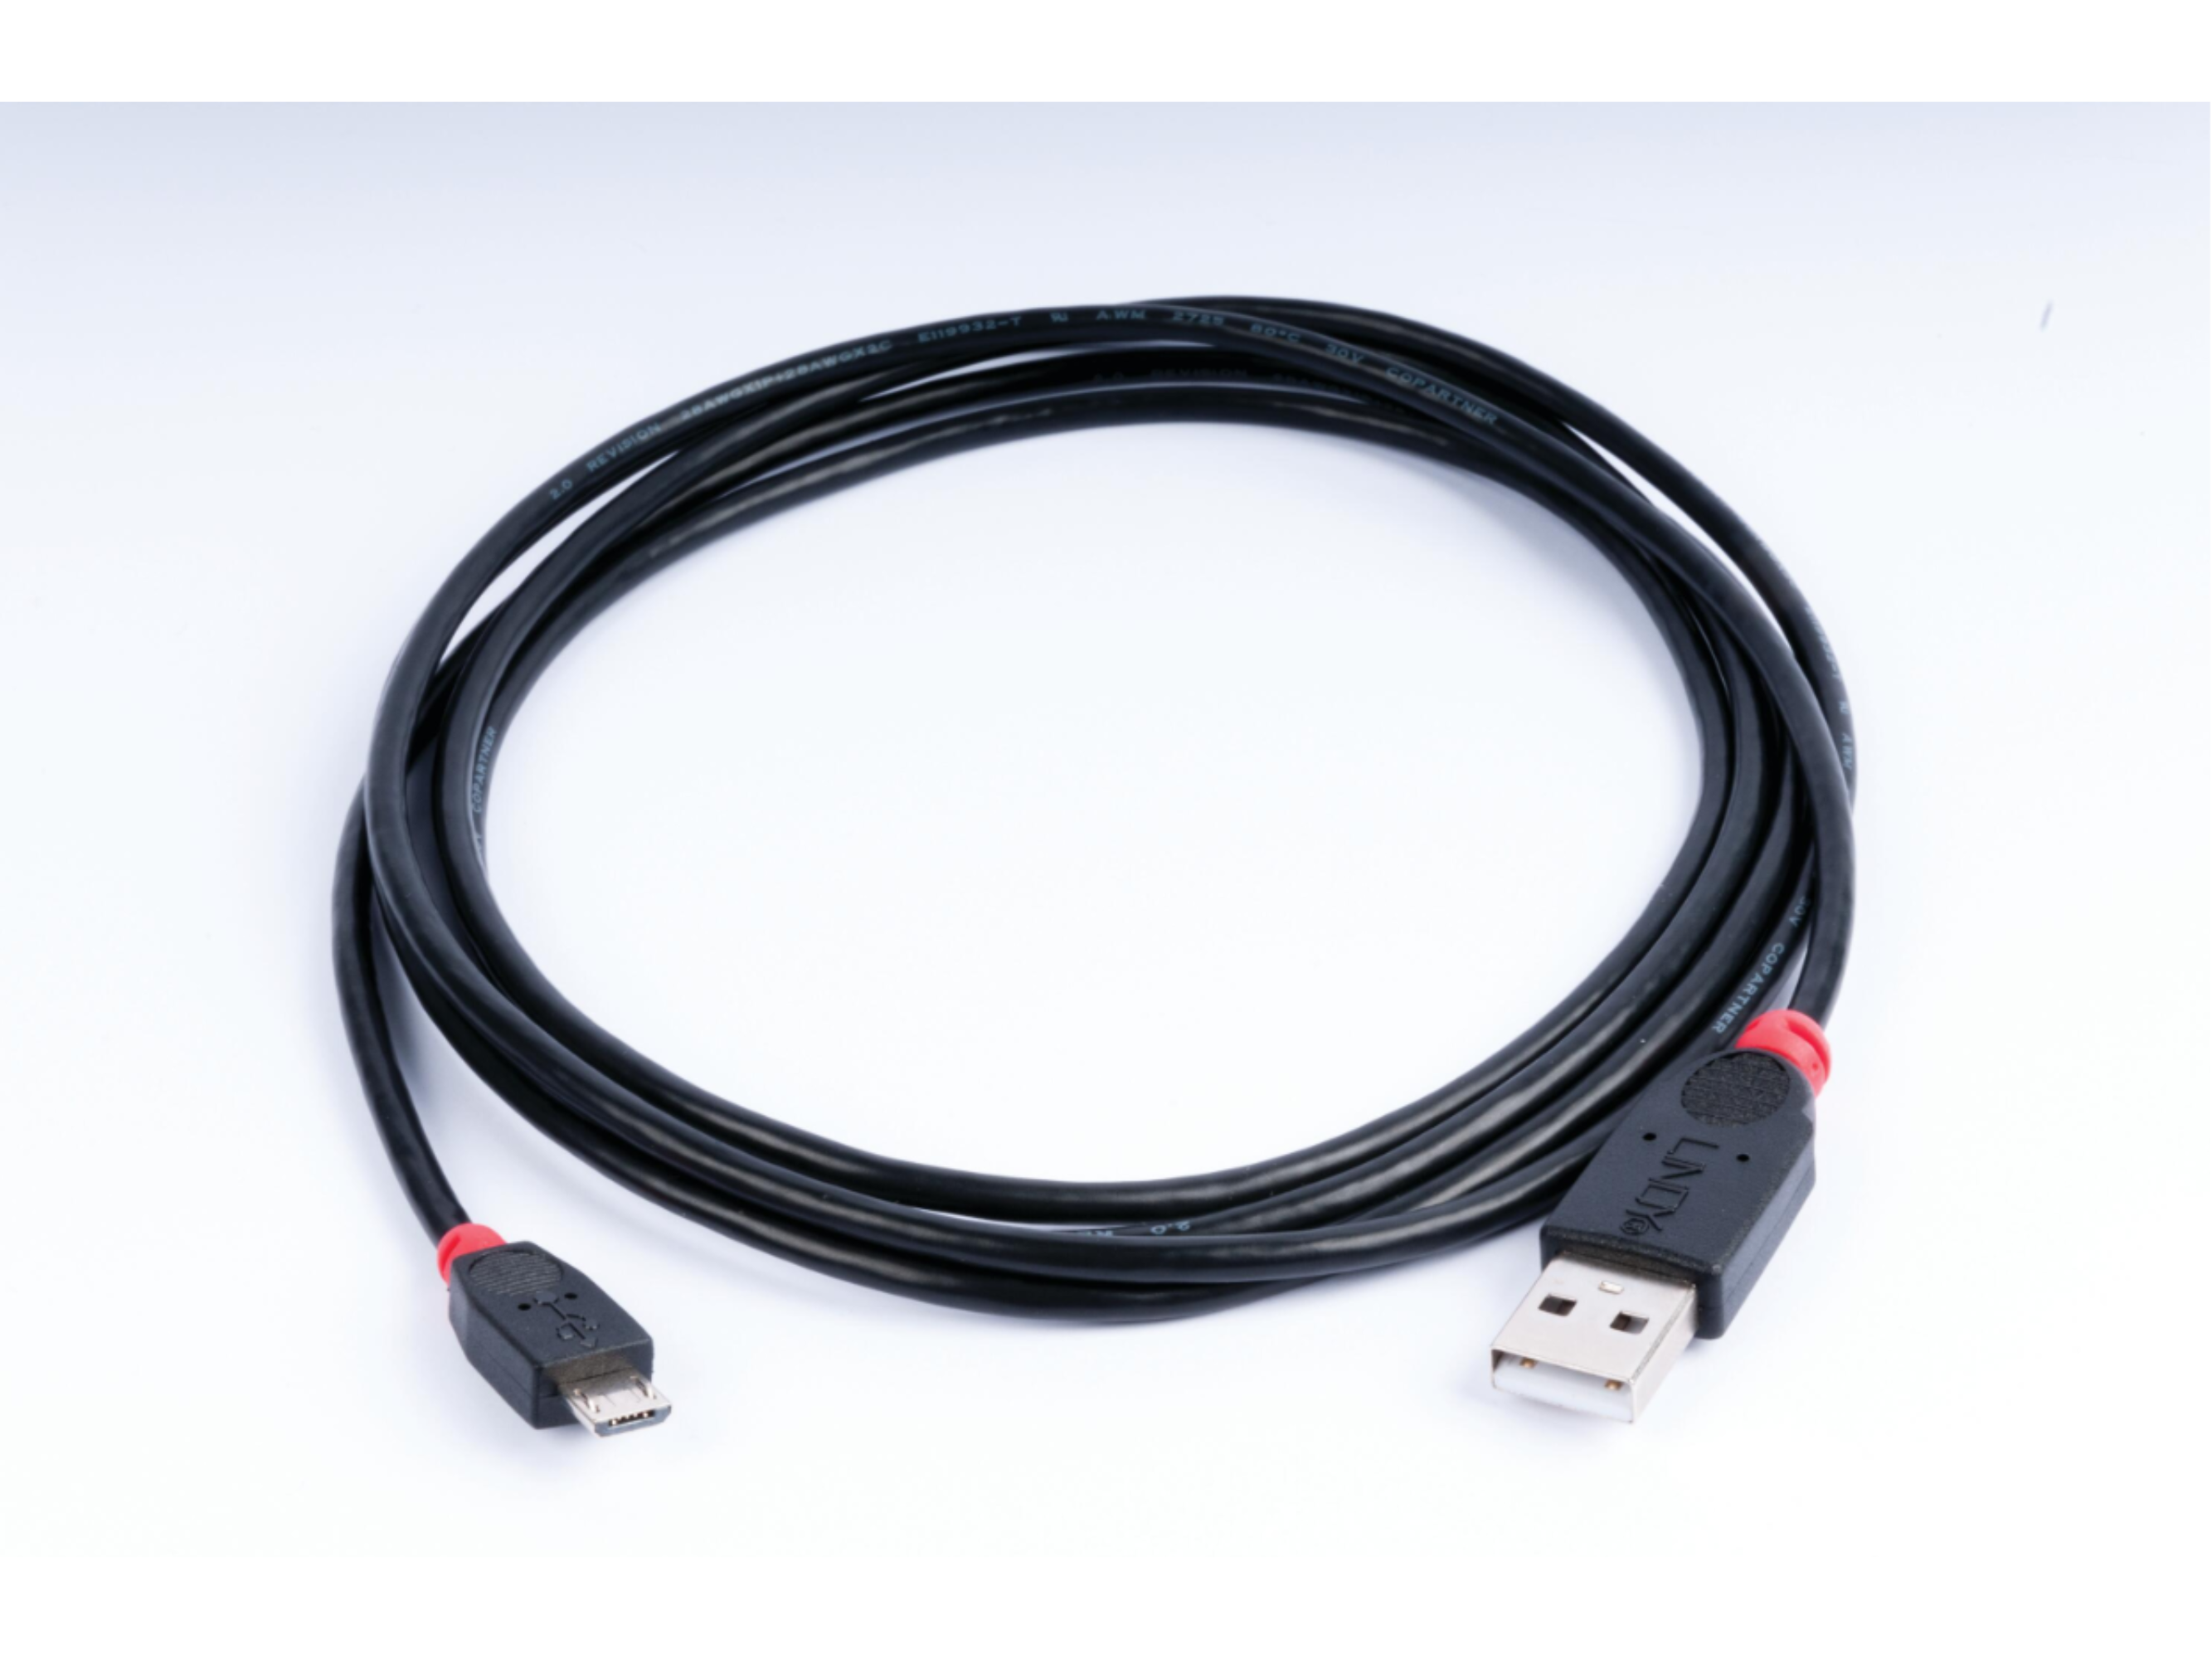 USB to micro-USB cable, 2 m for connection of RUGOSURF 20 to PC